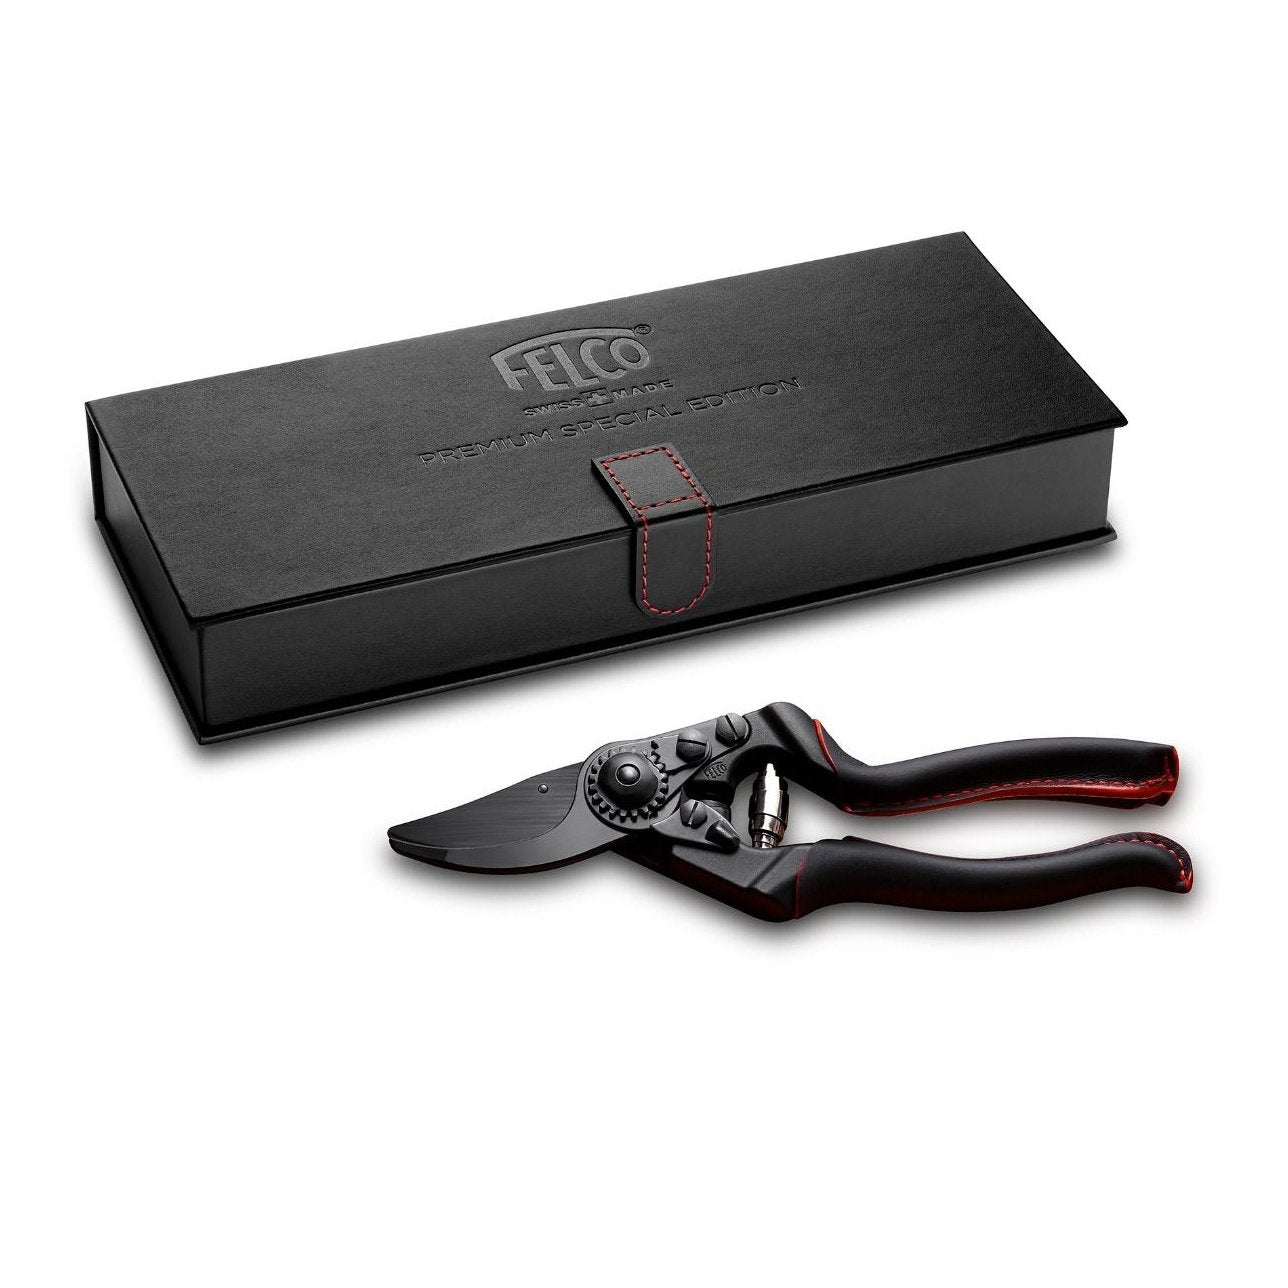 Felco 6 Special Edition Premium Bypass Pruner F-6PSE